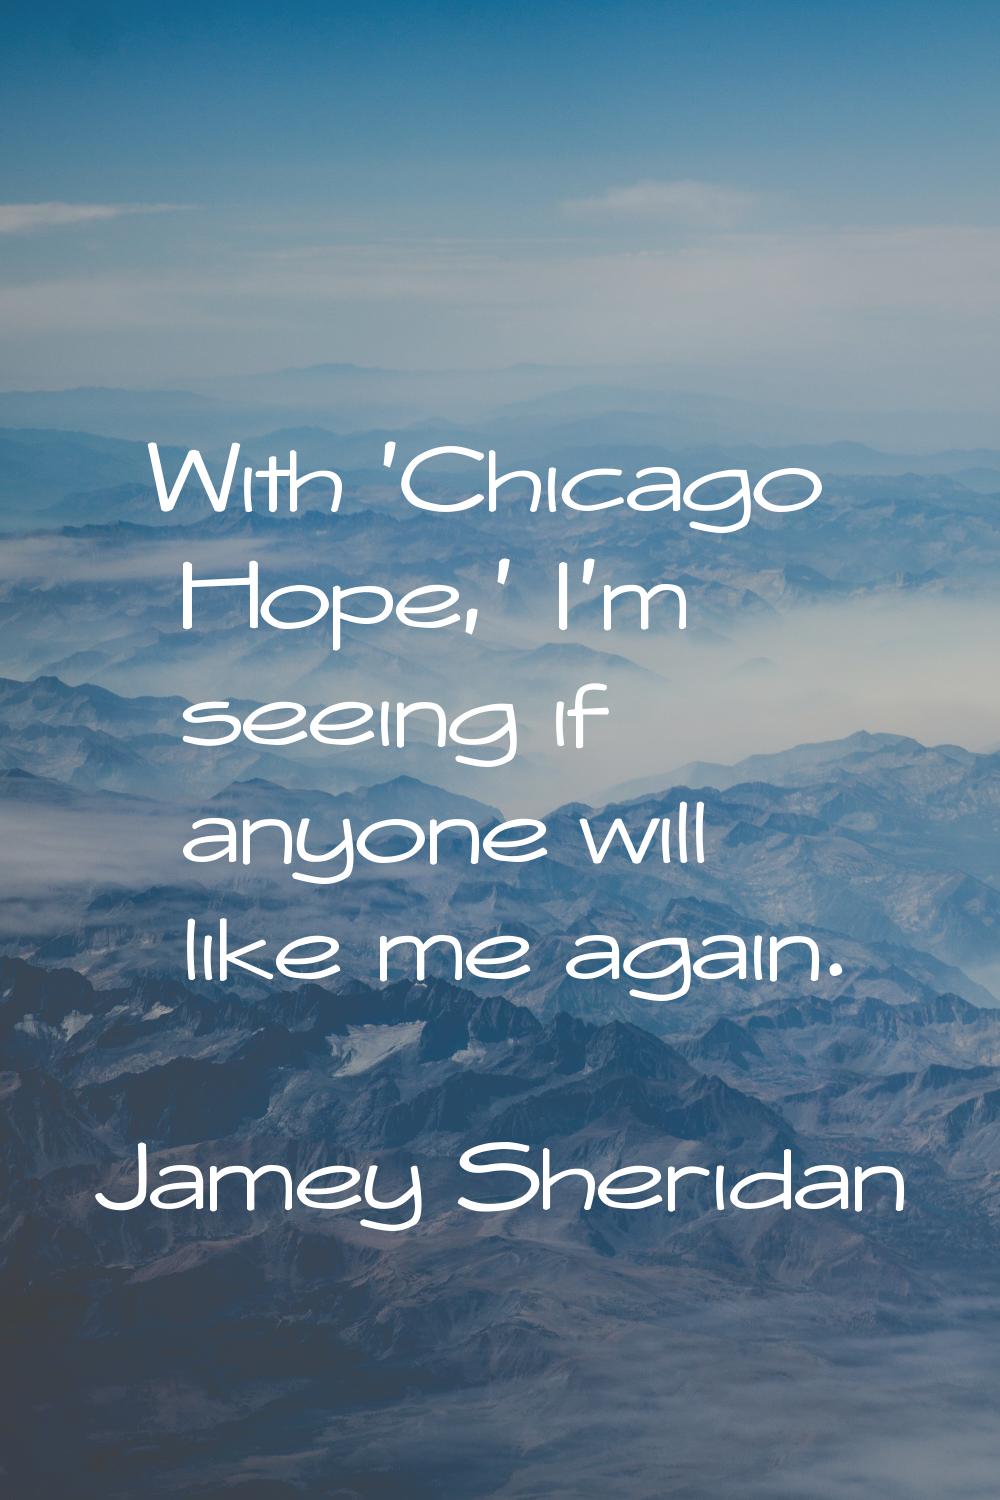 With 'Chicago Hope,' I'm seeing if anyone will like me again.